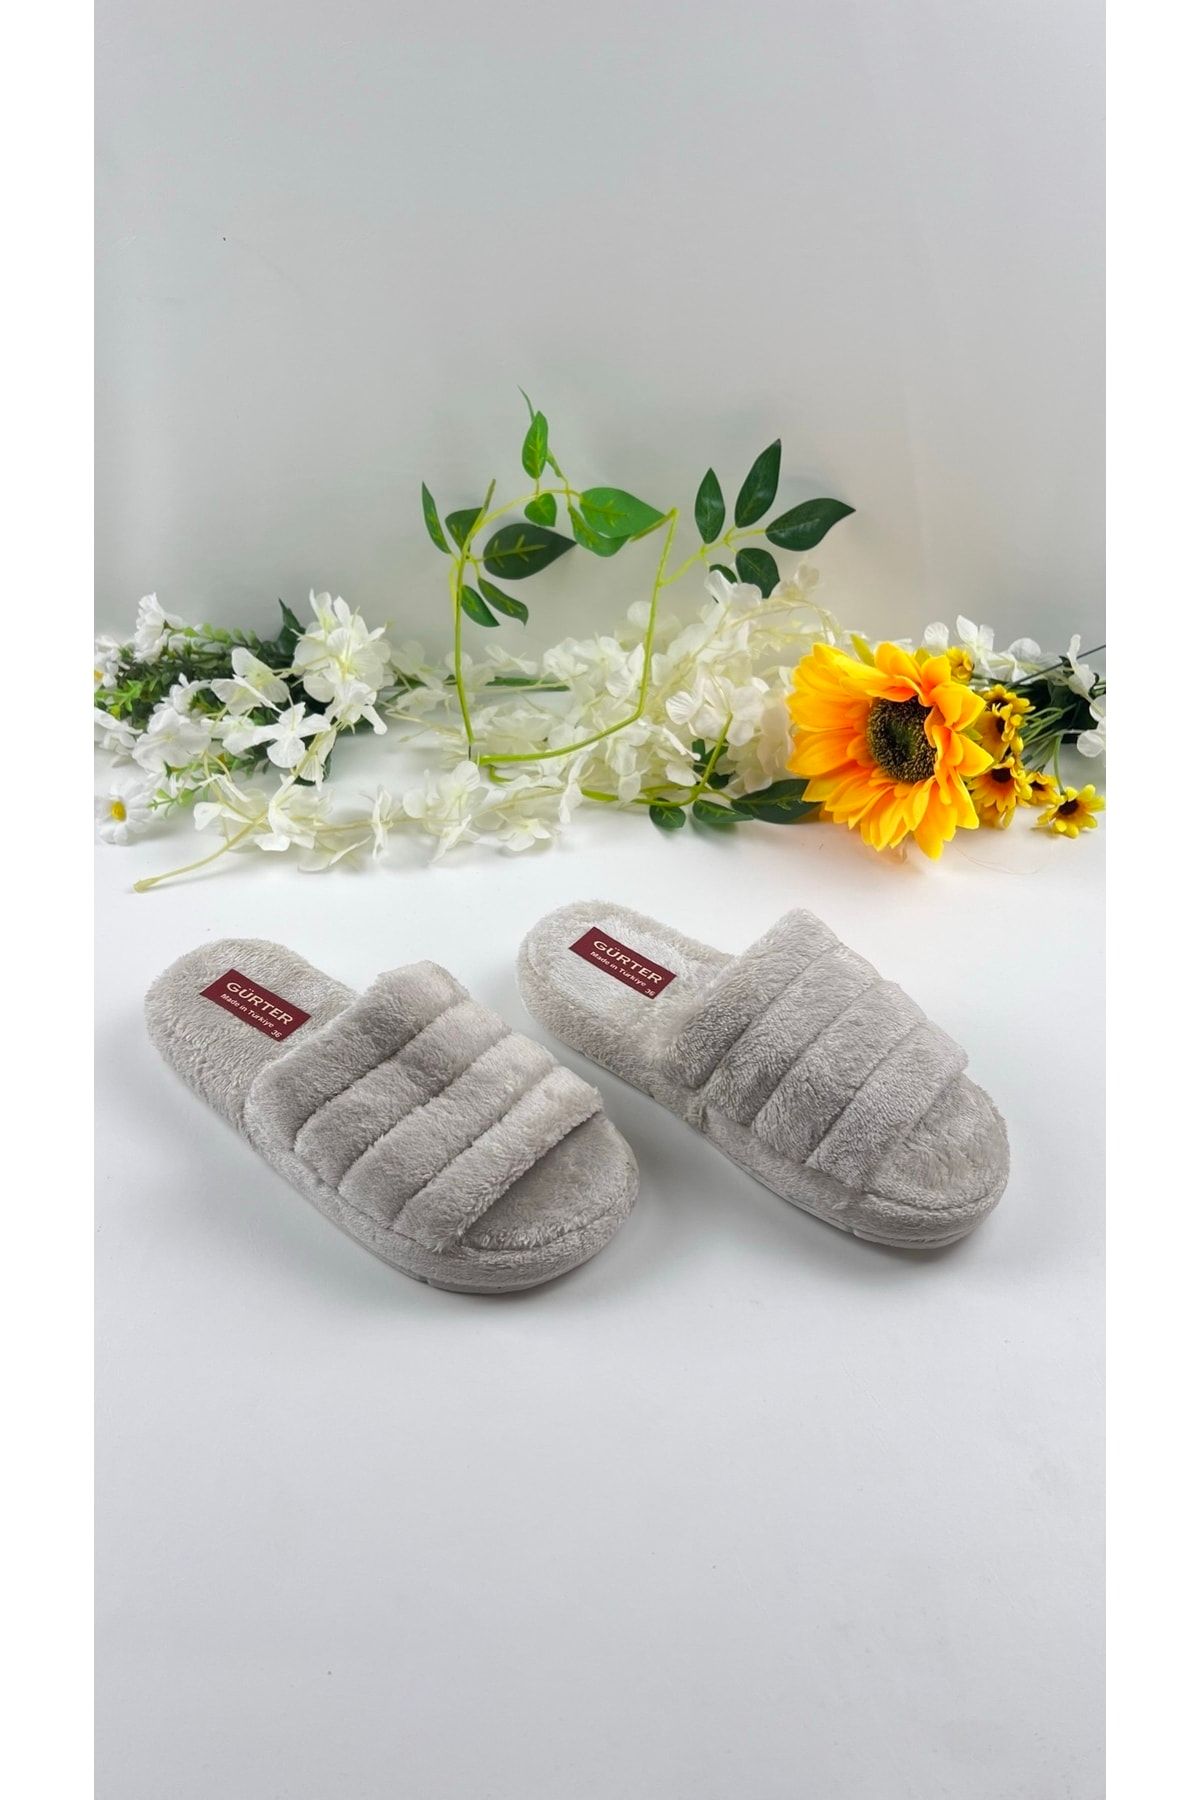 DOCTOR EXTRA SOFT Slippers for Women Orthopedic Diabetic Pregnancy  Lightweight Flat House Flip flops at Rs 100/pair in Mumbai